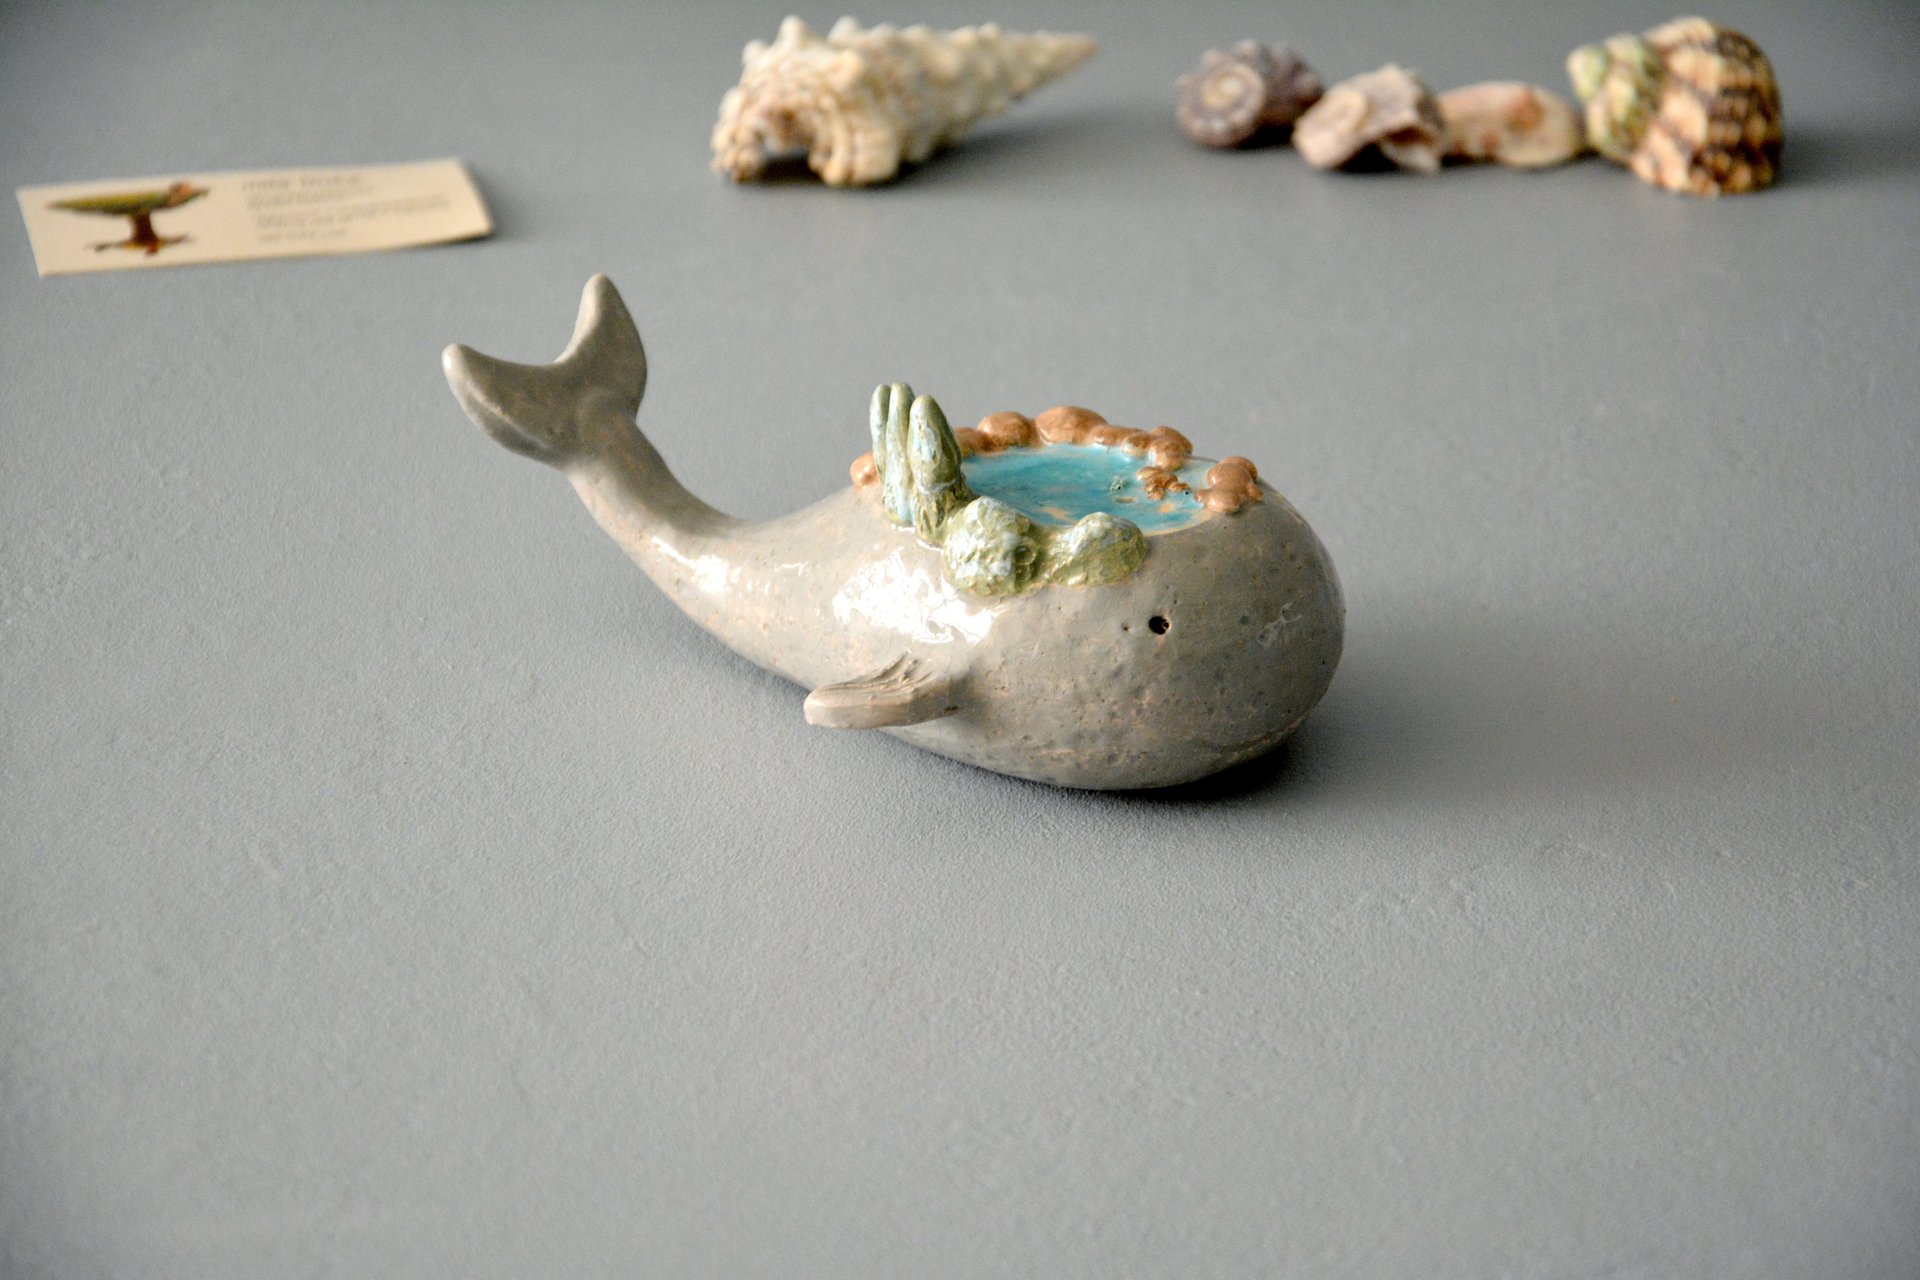 Little whale - Ceramic fishes, height - 5 cm, photo 4 of 5.